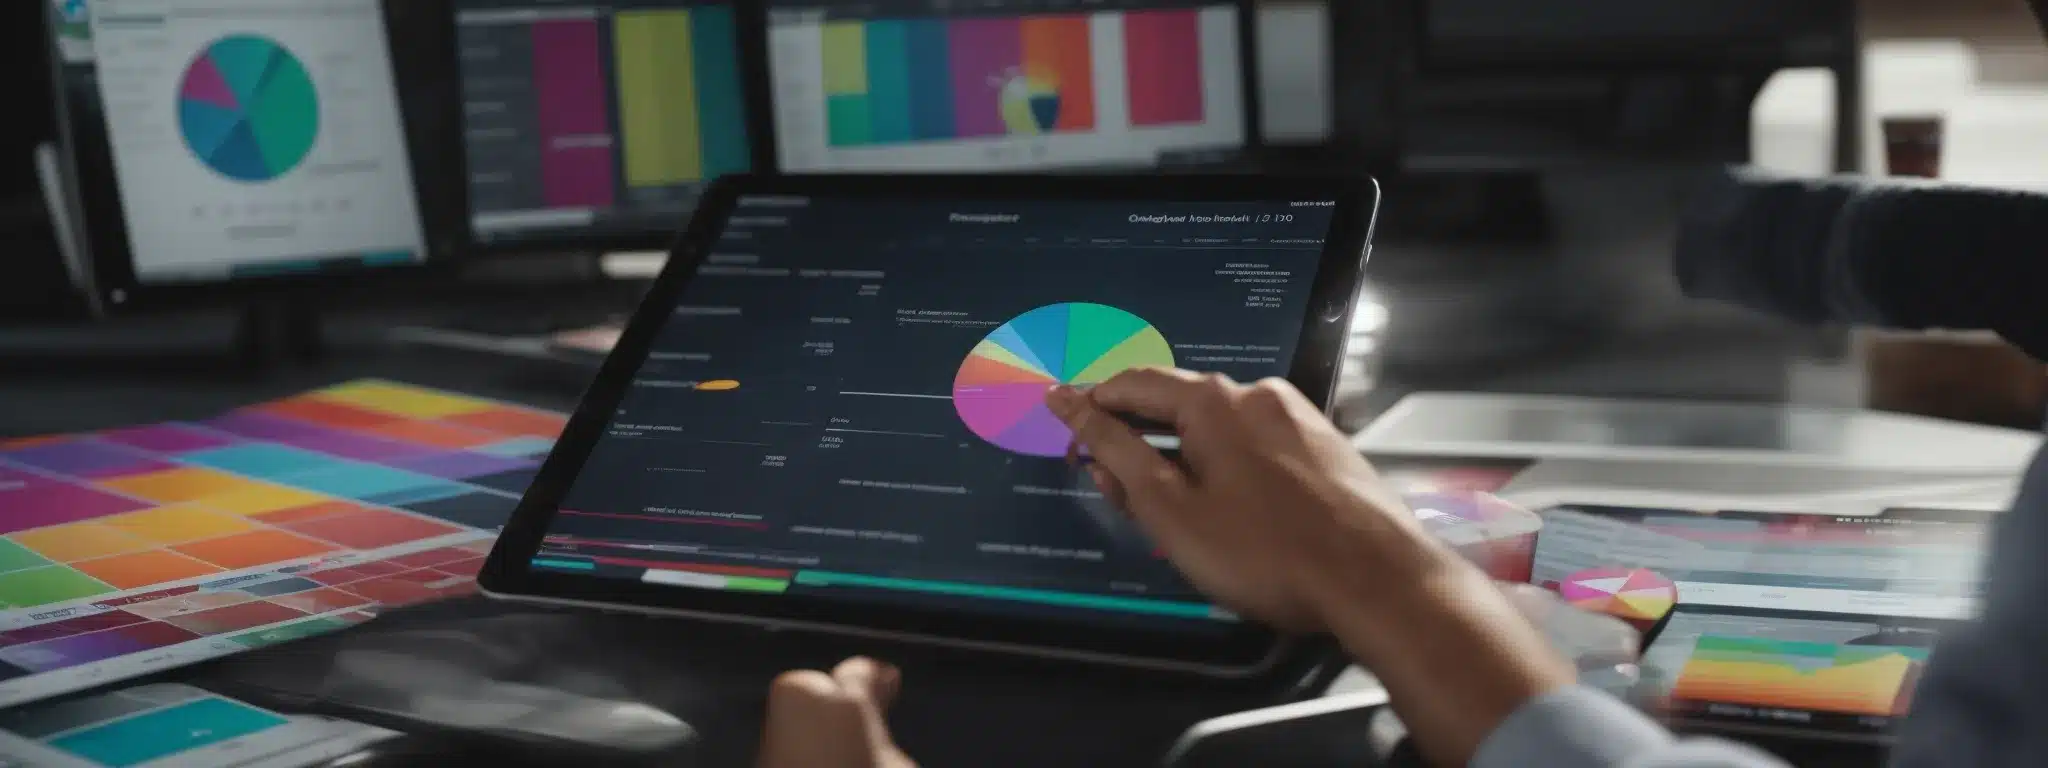 A Marketing Strategist Intently Analyzes A Colorful Pie Chart Representing Market Segments On A Digital Tablet At A Modern Workspace.